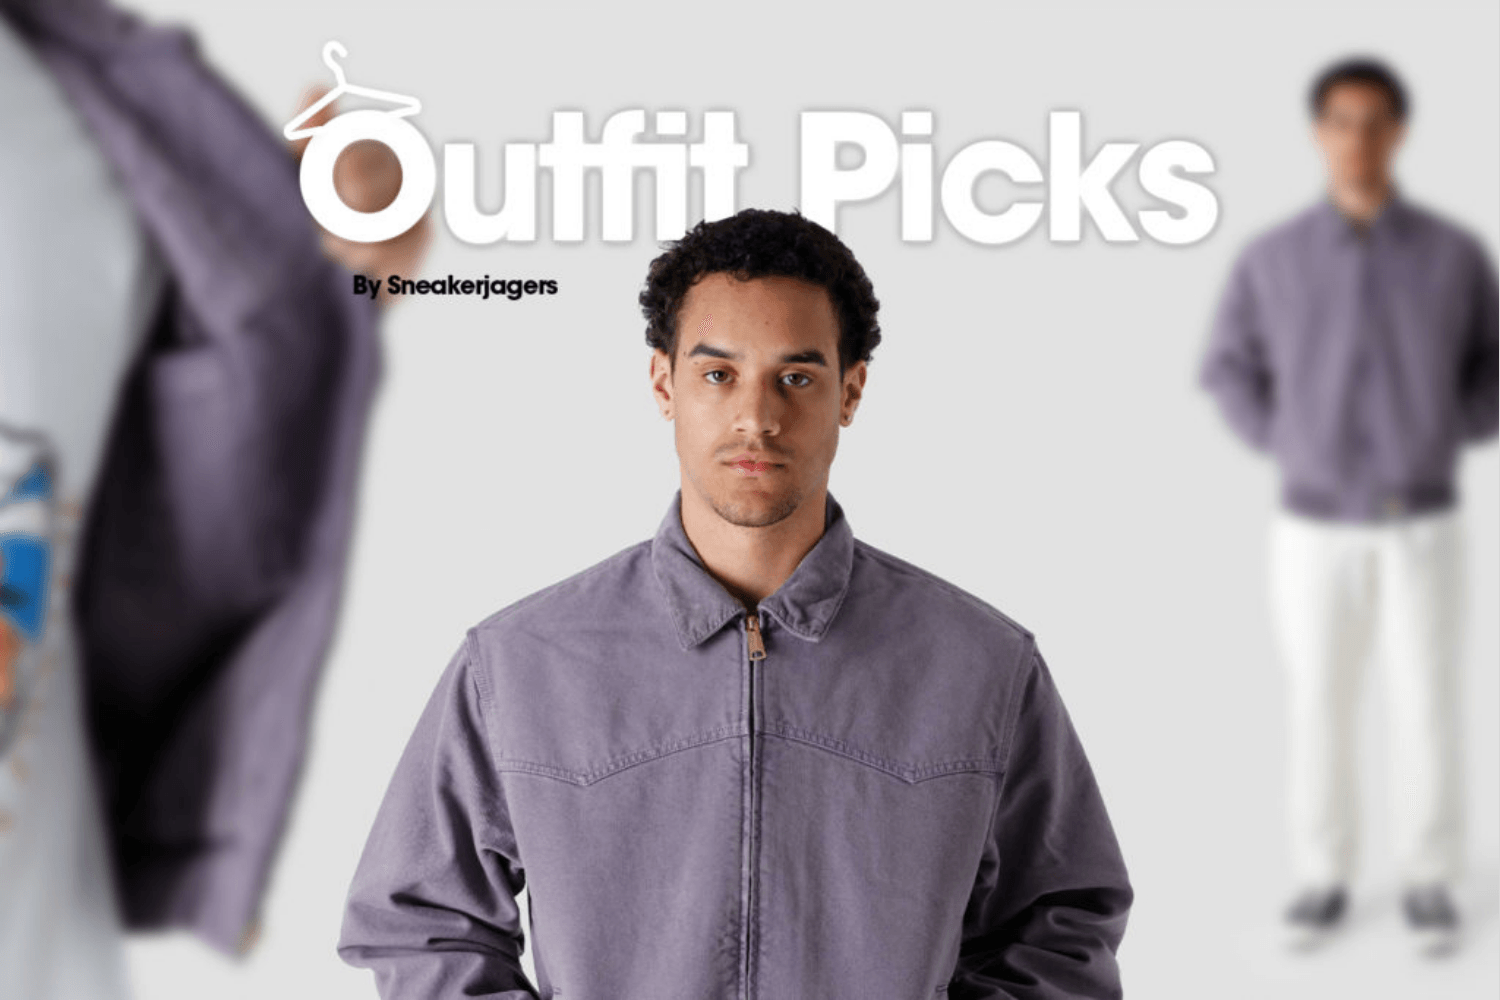 Outfit Picks by Sneakerjagers - Woche 15